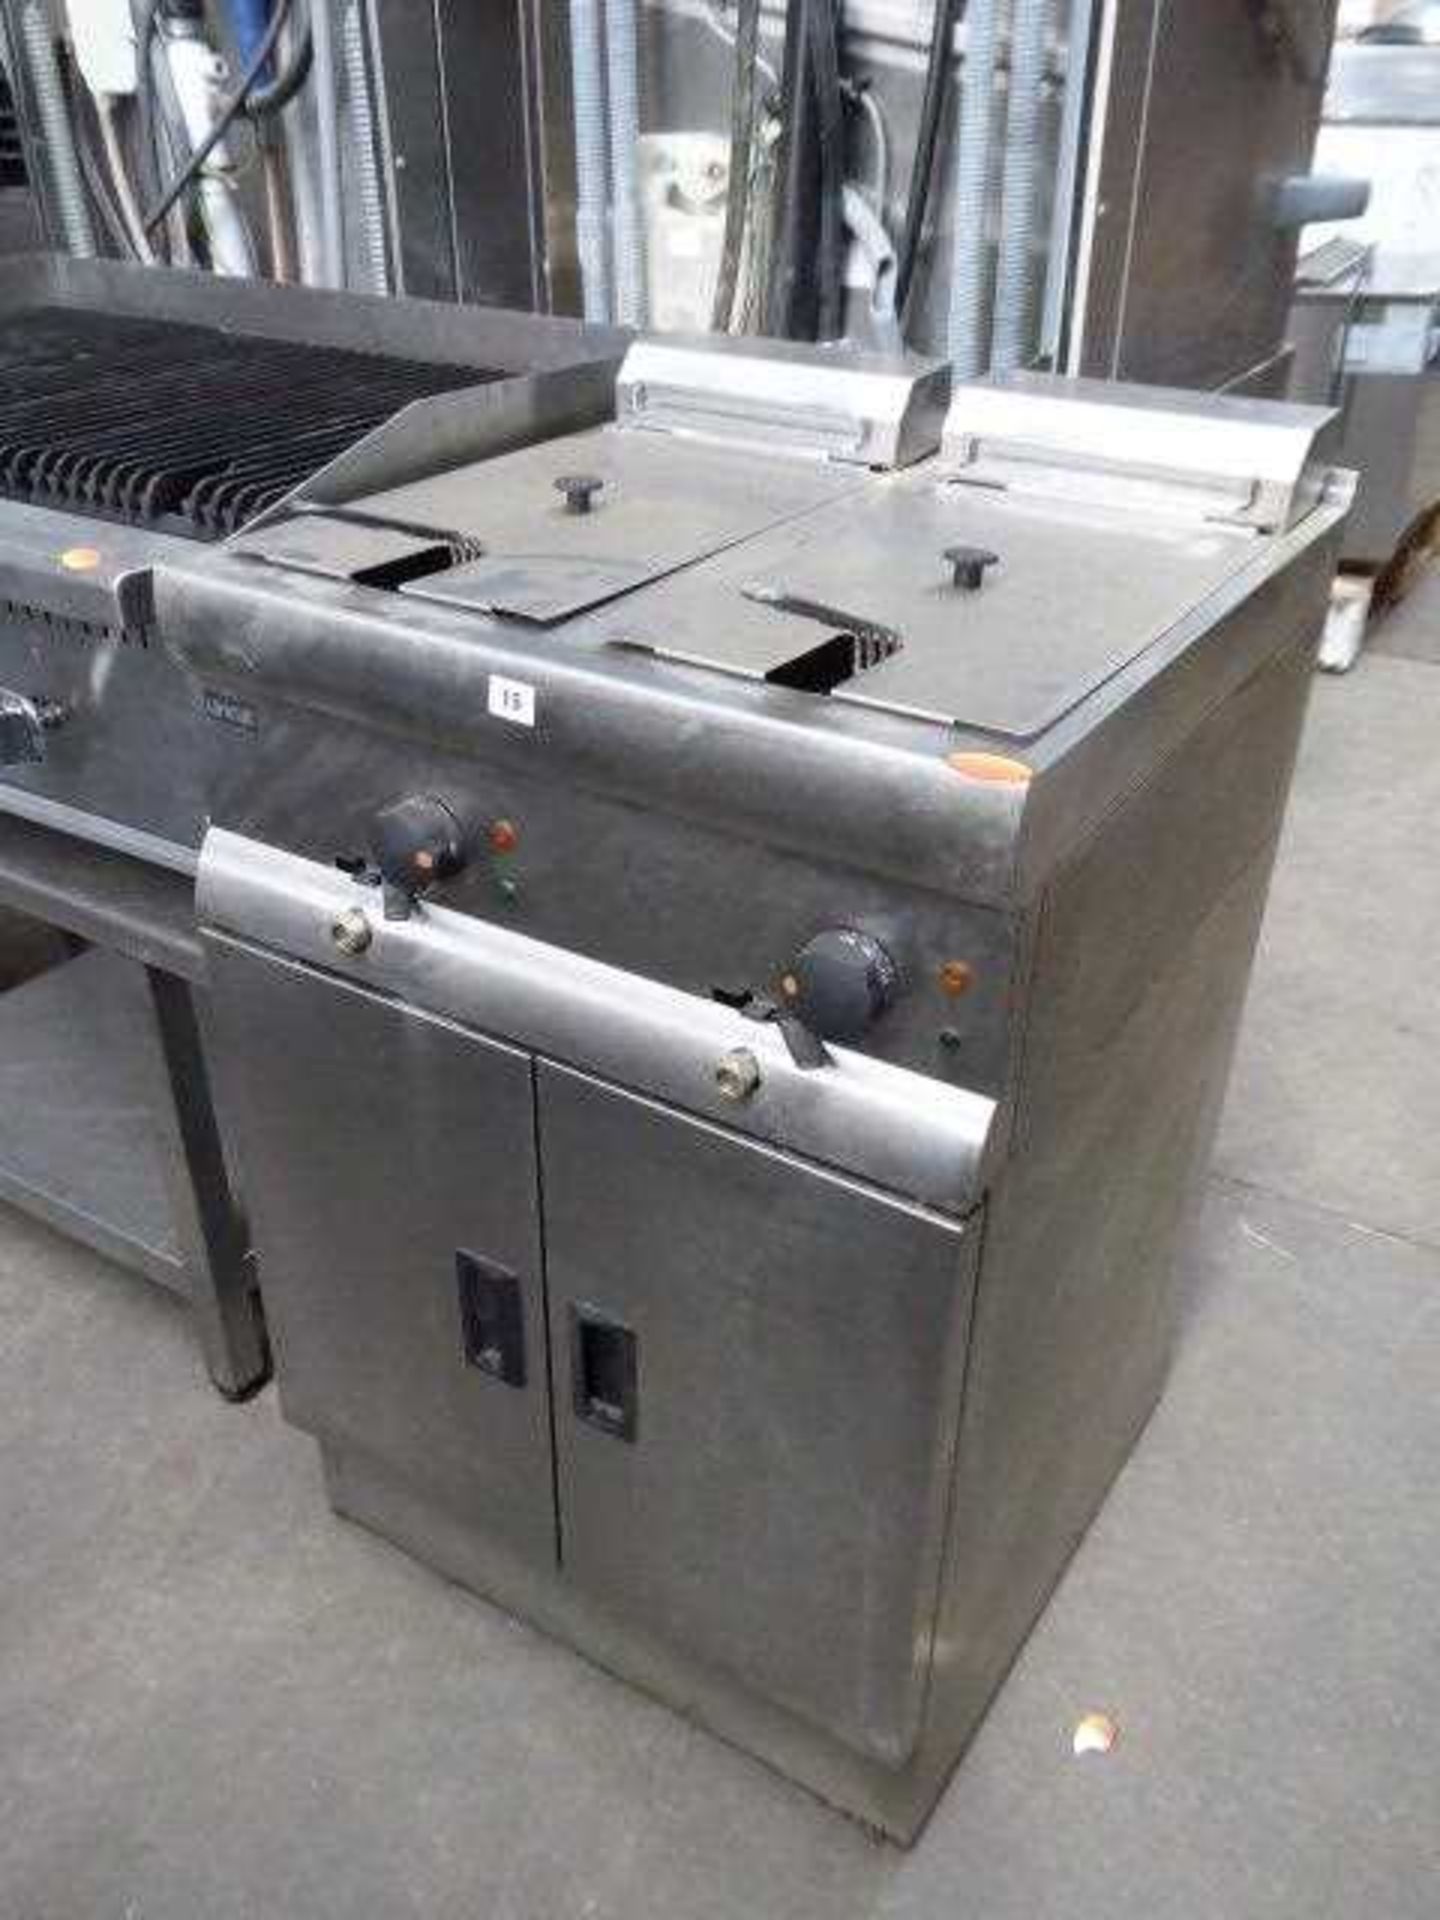 60cm electric Lincat 2 well fryer with 2 baskets